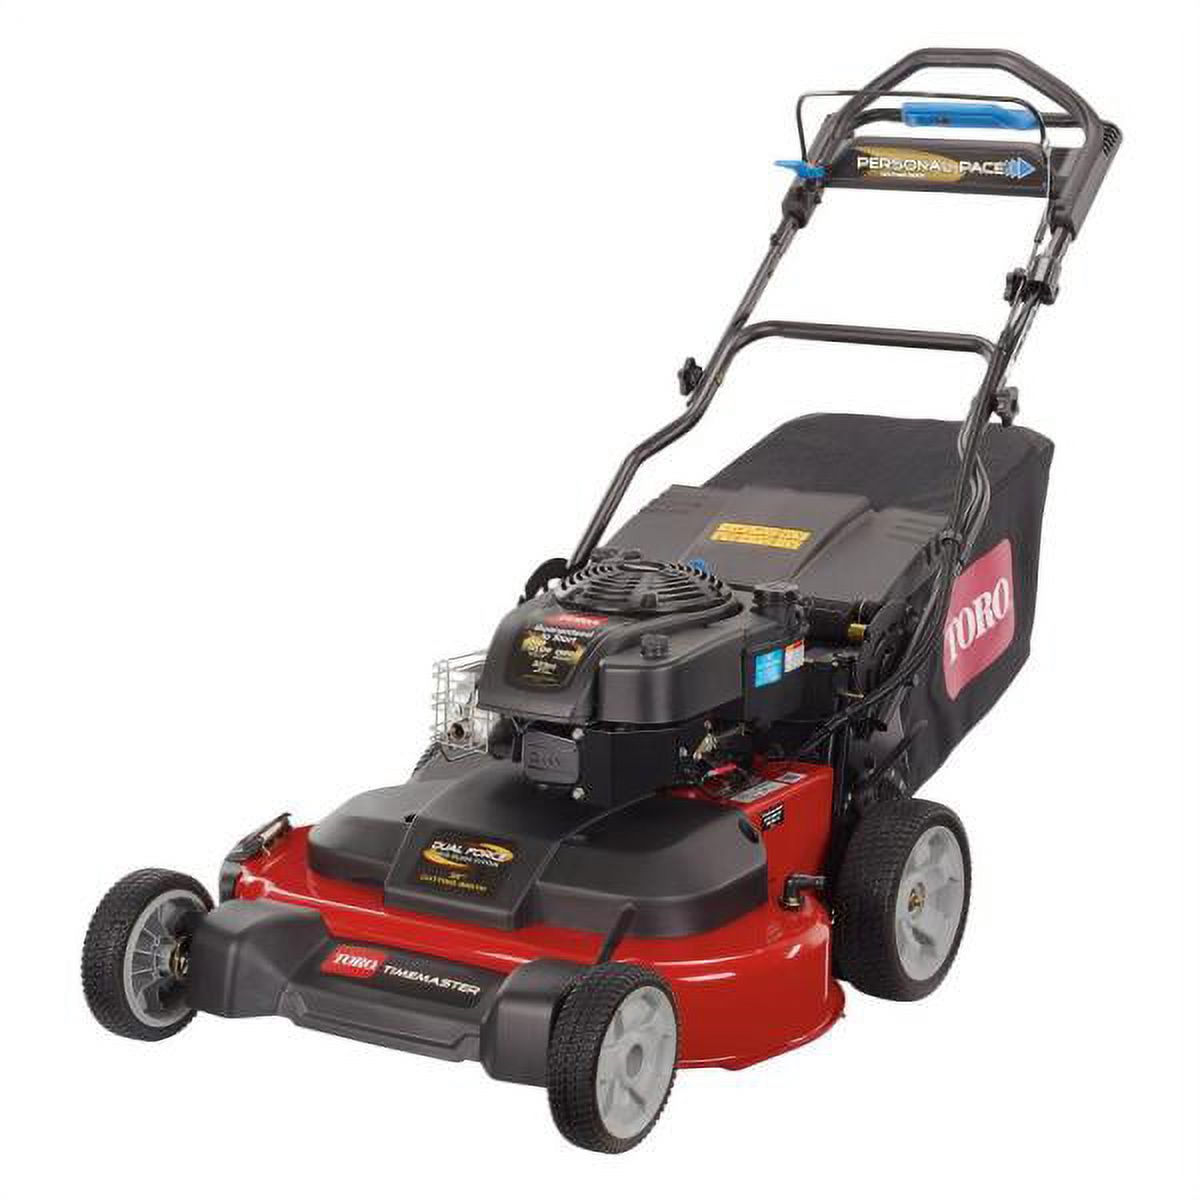 Toro 21199 TimeMaster 30 in. Briggs & Stratton Personal Pace Self-Propelled - image 2 of 8